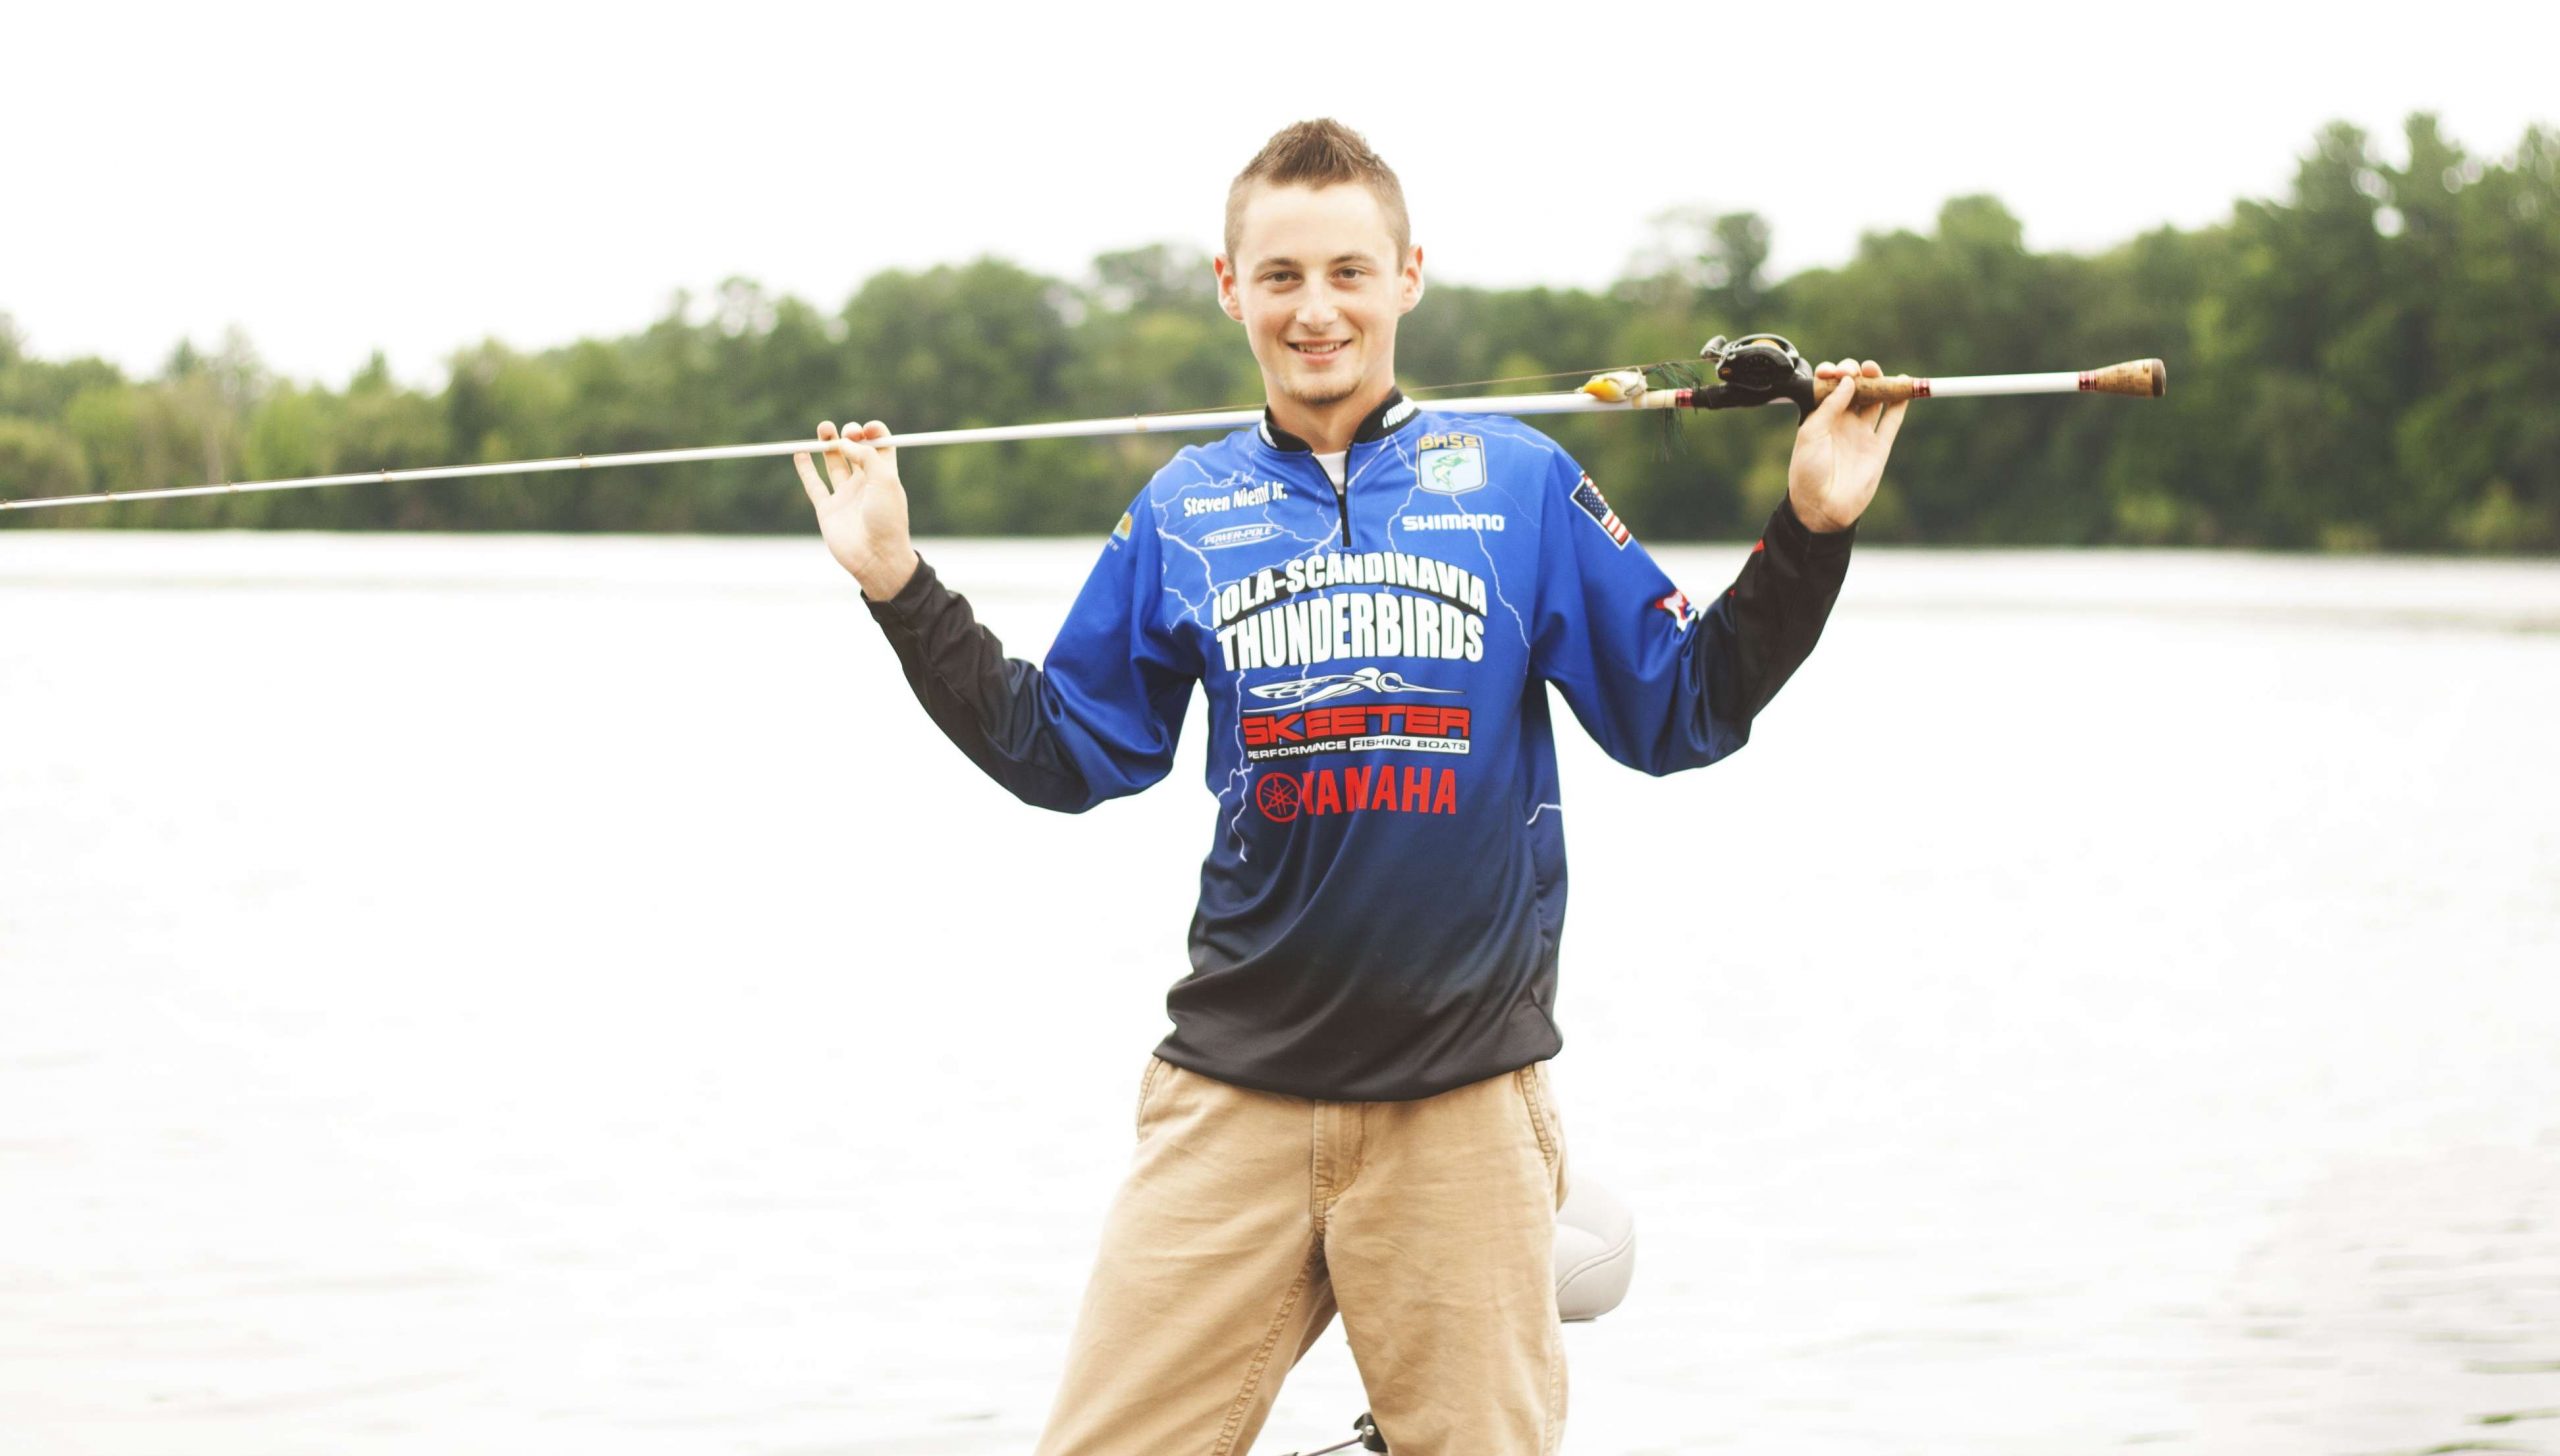 <b>Wisconsin: Steve Niemi Jr.</b><br>
Niemi of Scandinavia, Wis., is a senior and member of the Waupaca Junior Bass Busters. He has earned four first-place titles and two Top 5 finishes. He also received the Lunker award for the High School/Junior teams for the 2015 year. Niemi was also a strong advocate in presenting information to the Iola-Scandinavia School Board to start the high school fishing team.
